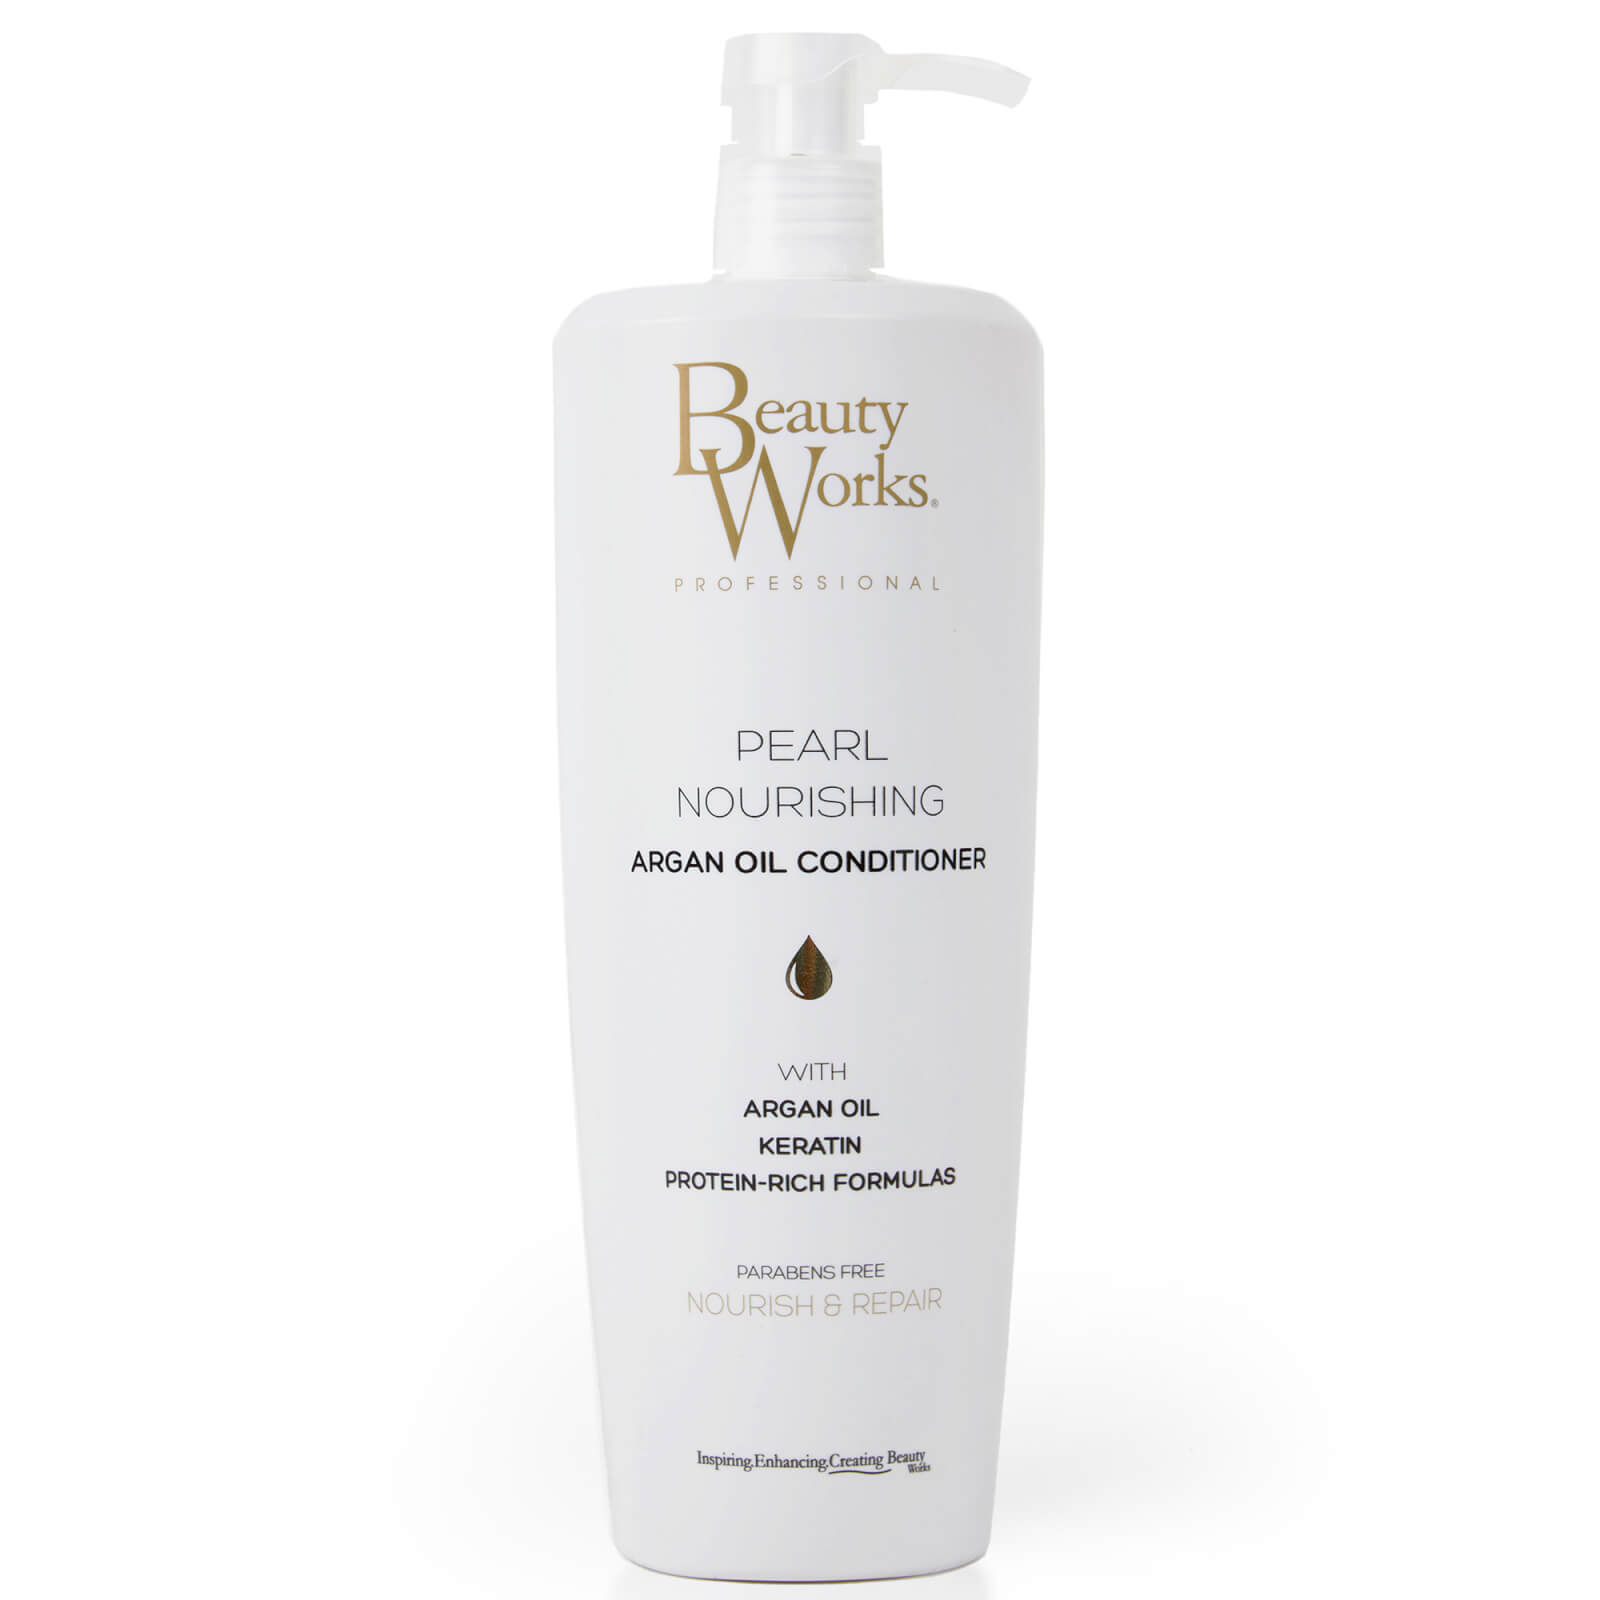 Image of Beauty Works Pearl Nourishing Argan Oil Conditioner 1 Litre